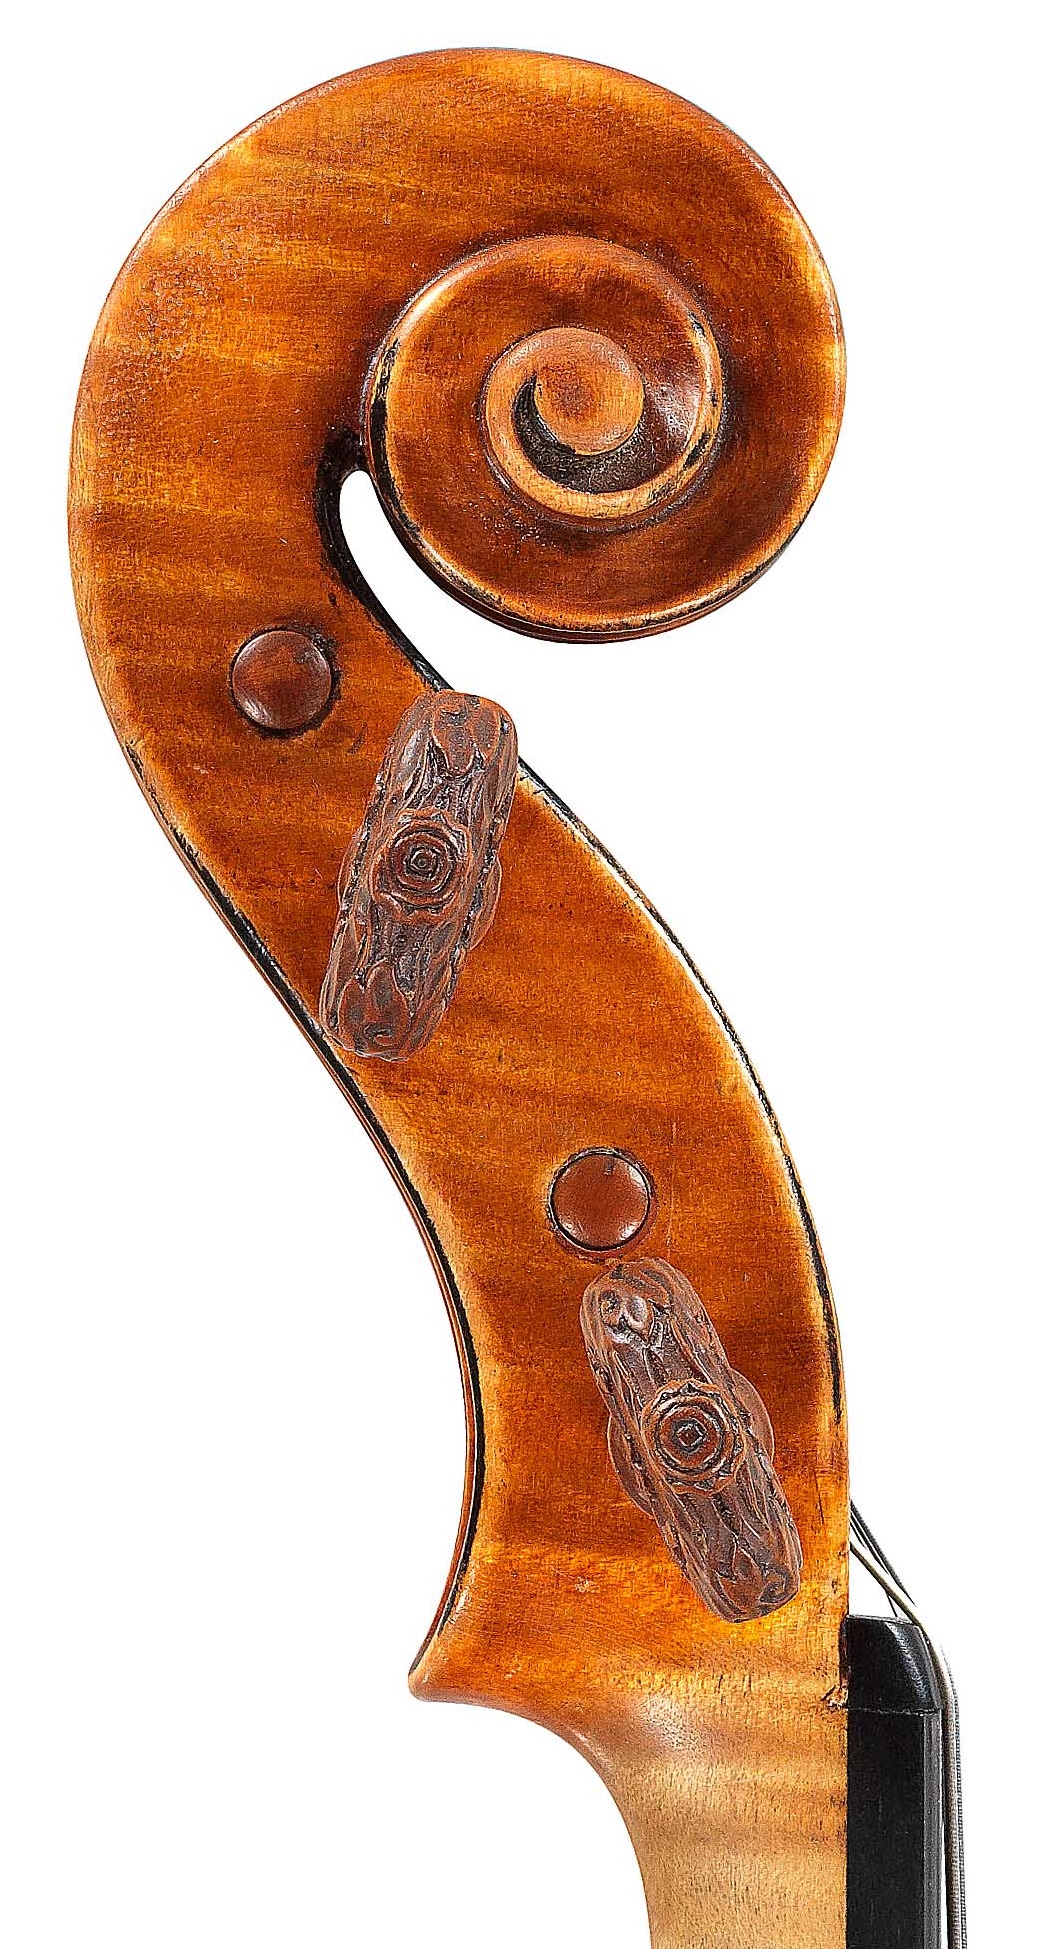 Scroll of violin by JB Vuillaume, St Paul, dated 1870, exhibited by Ingles & Hayday at Sotheby's in 2012